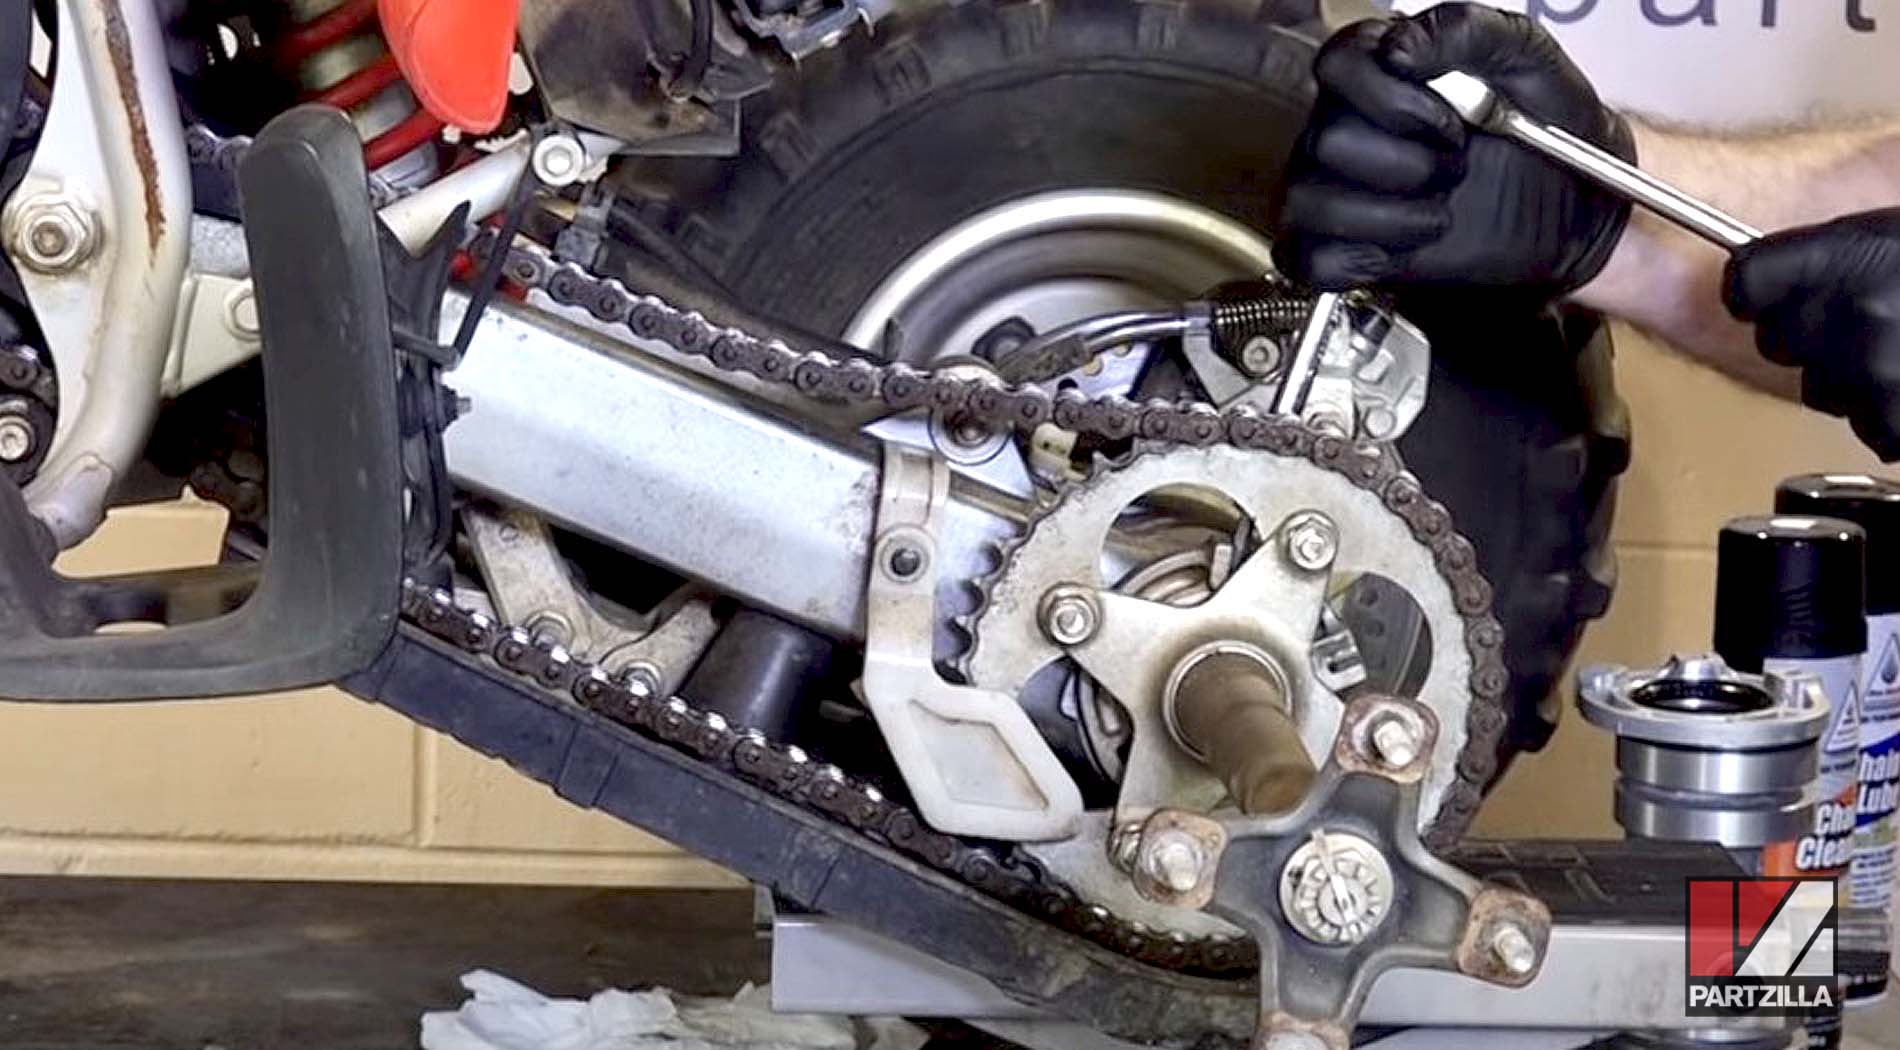 Honda TRX 400 chain adjustment and cleaning